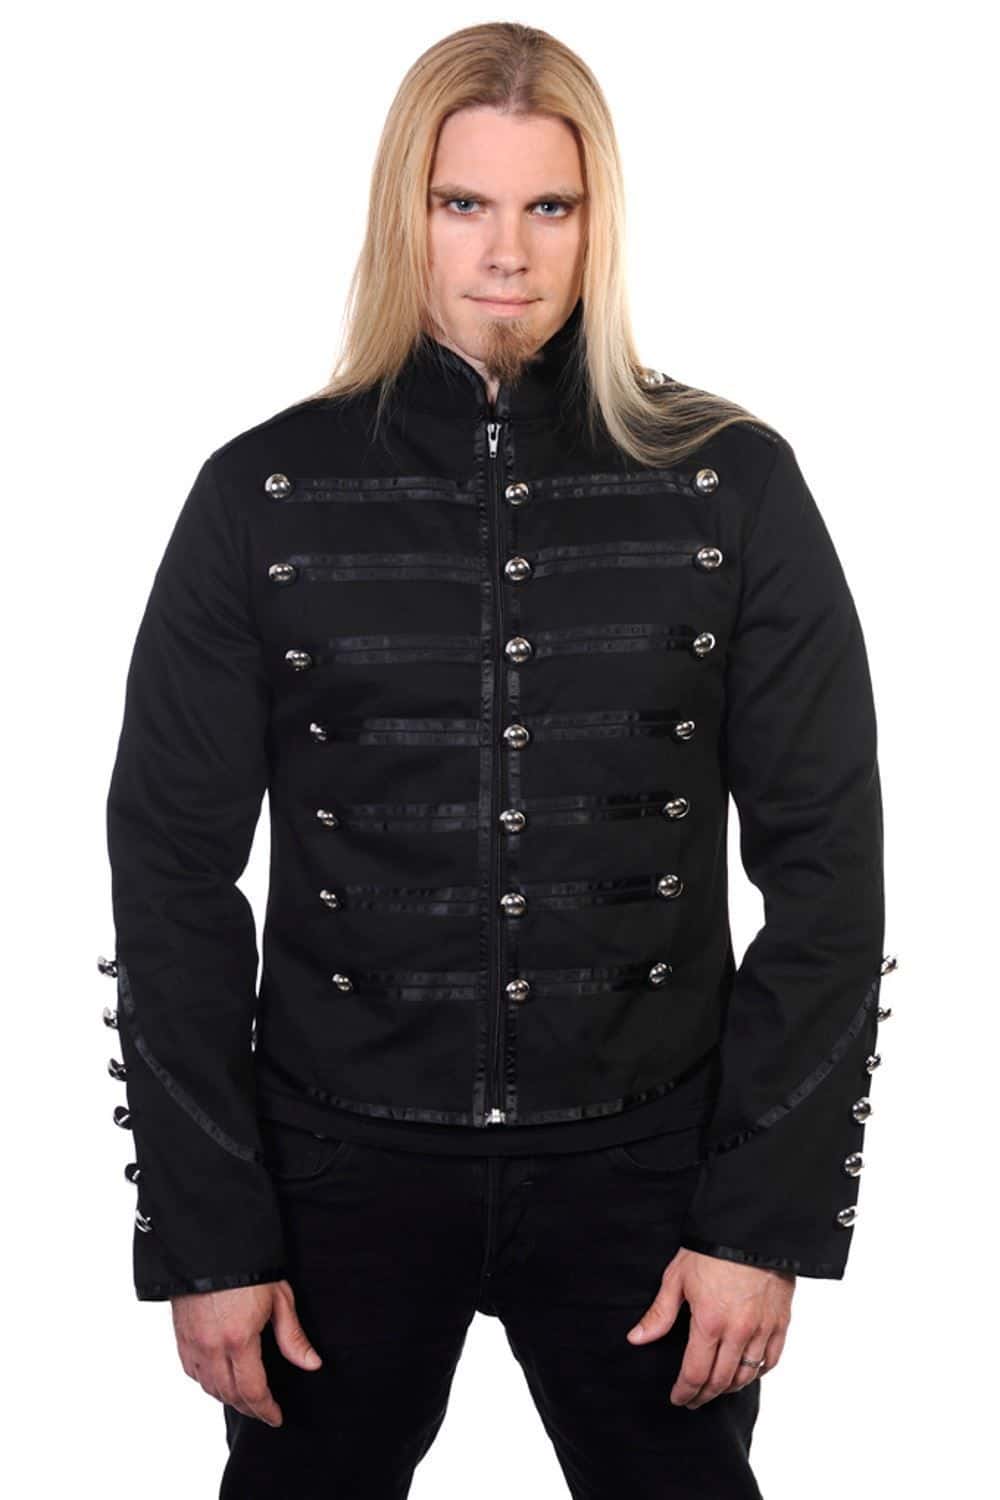 Men's Jacket Military Drummer Parade Marching Band Stage Live Rock Emo  Punk Goth